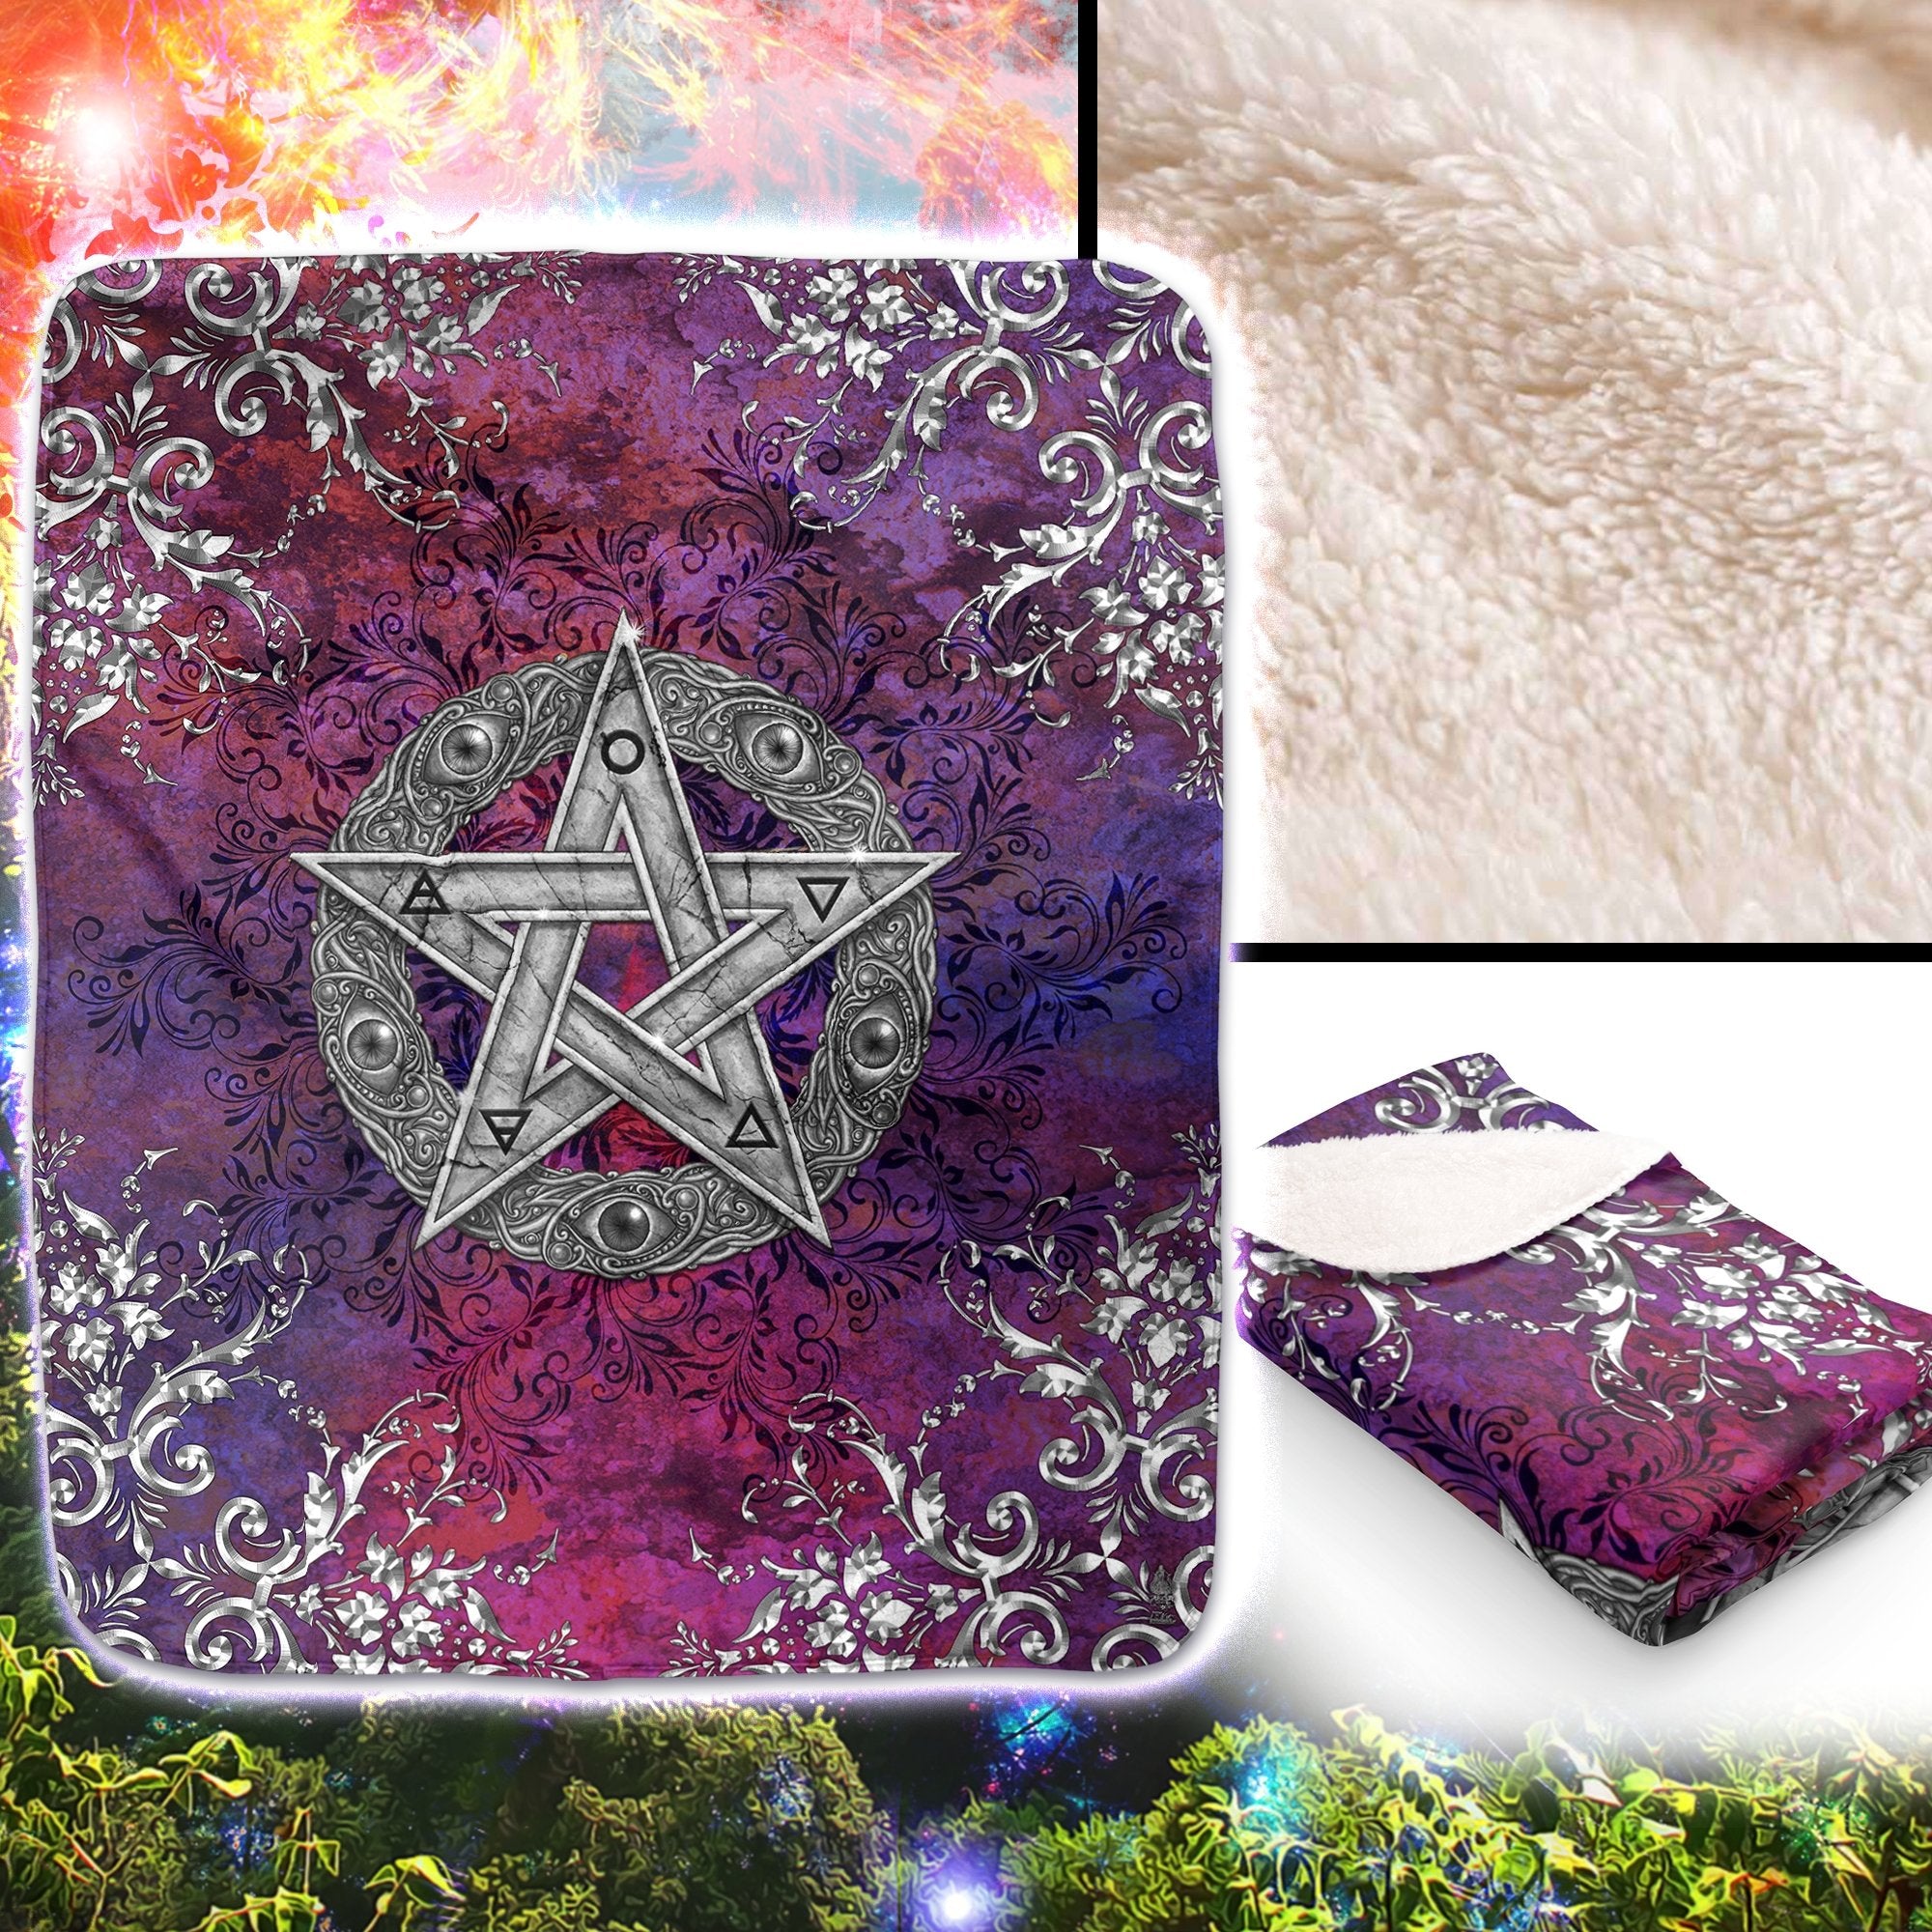 Wiccan Throw Fleece Blanket, Pagan Decor, Witchy Room - Silver Pentacle - Abysm Internal